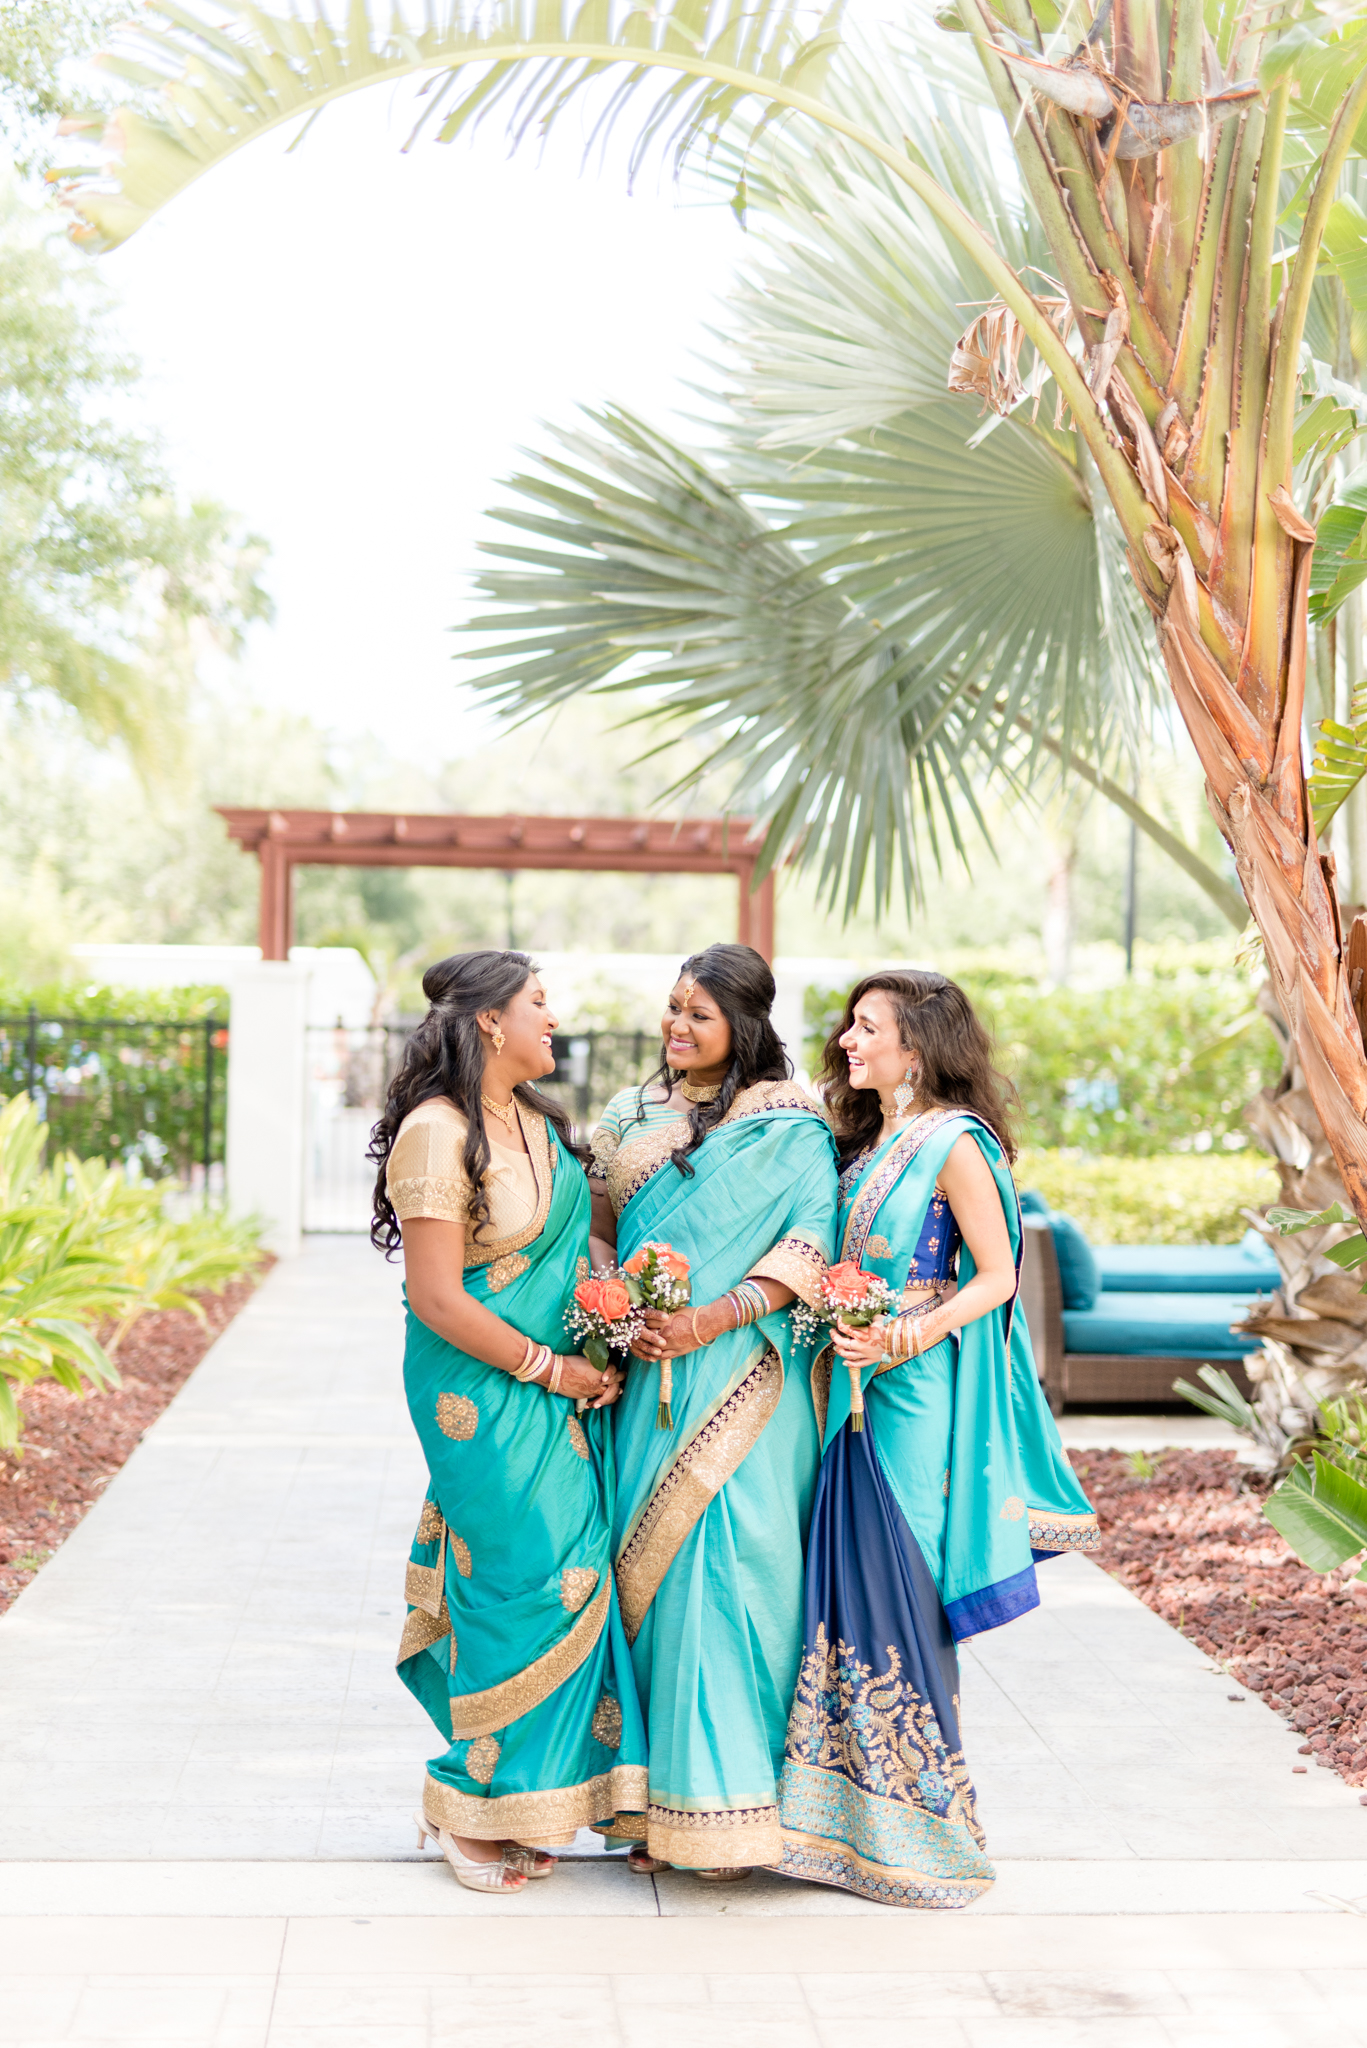 Bridesmaids smile and laugh together.